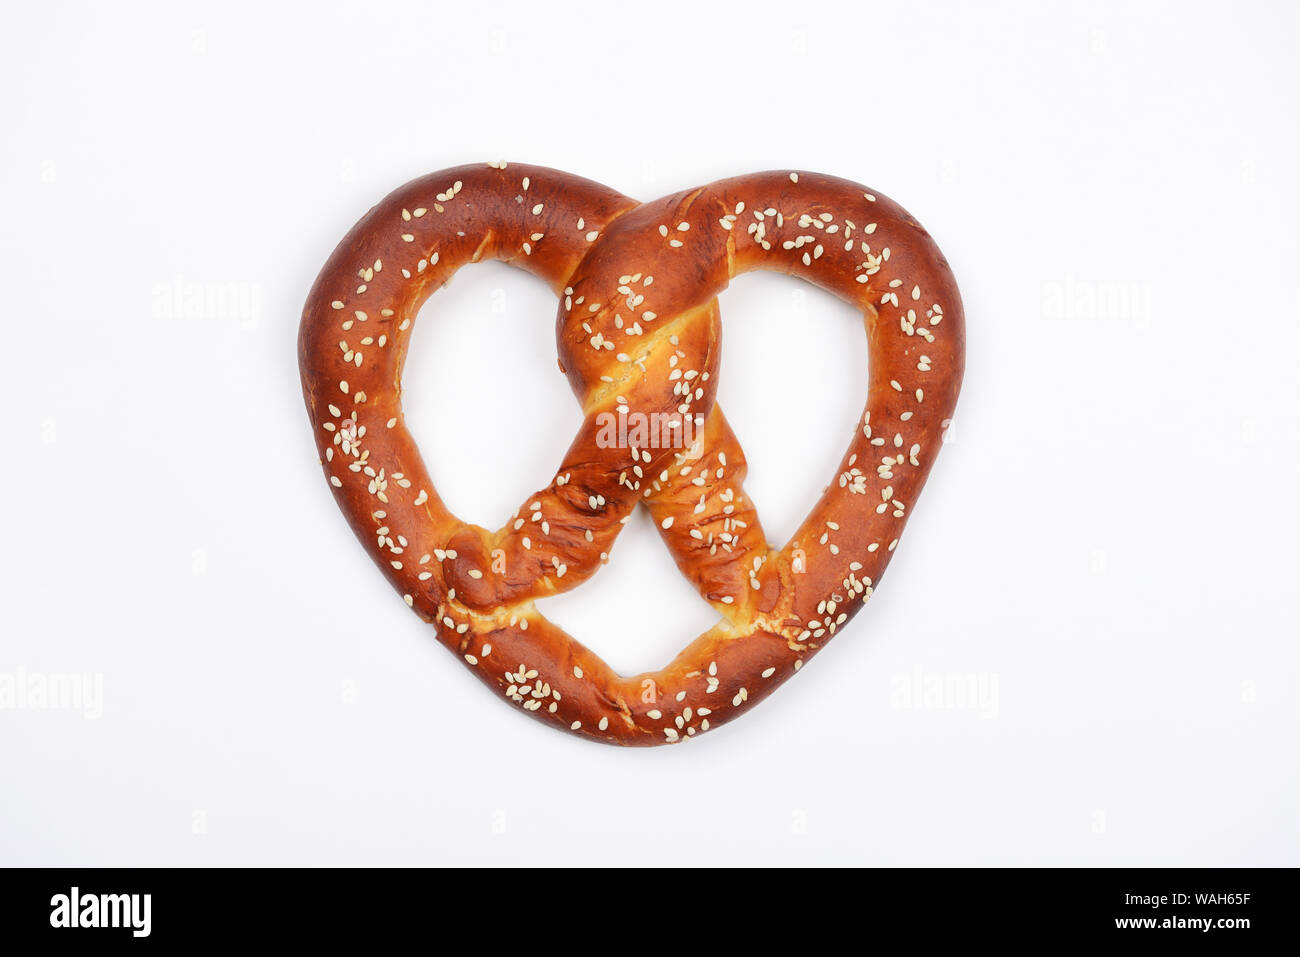 The hand-made pretzel for Octoberfest party on white background Stock Photo